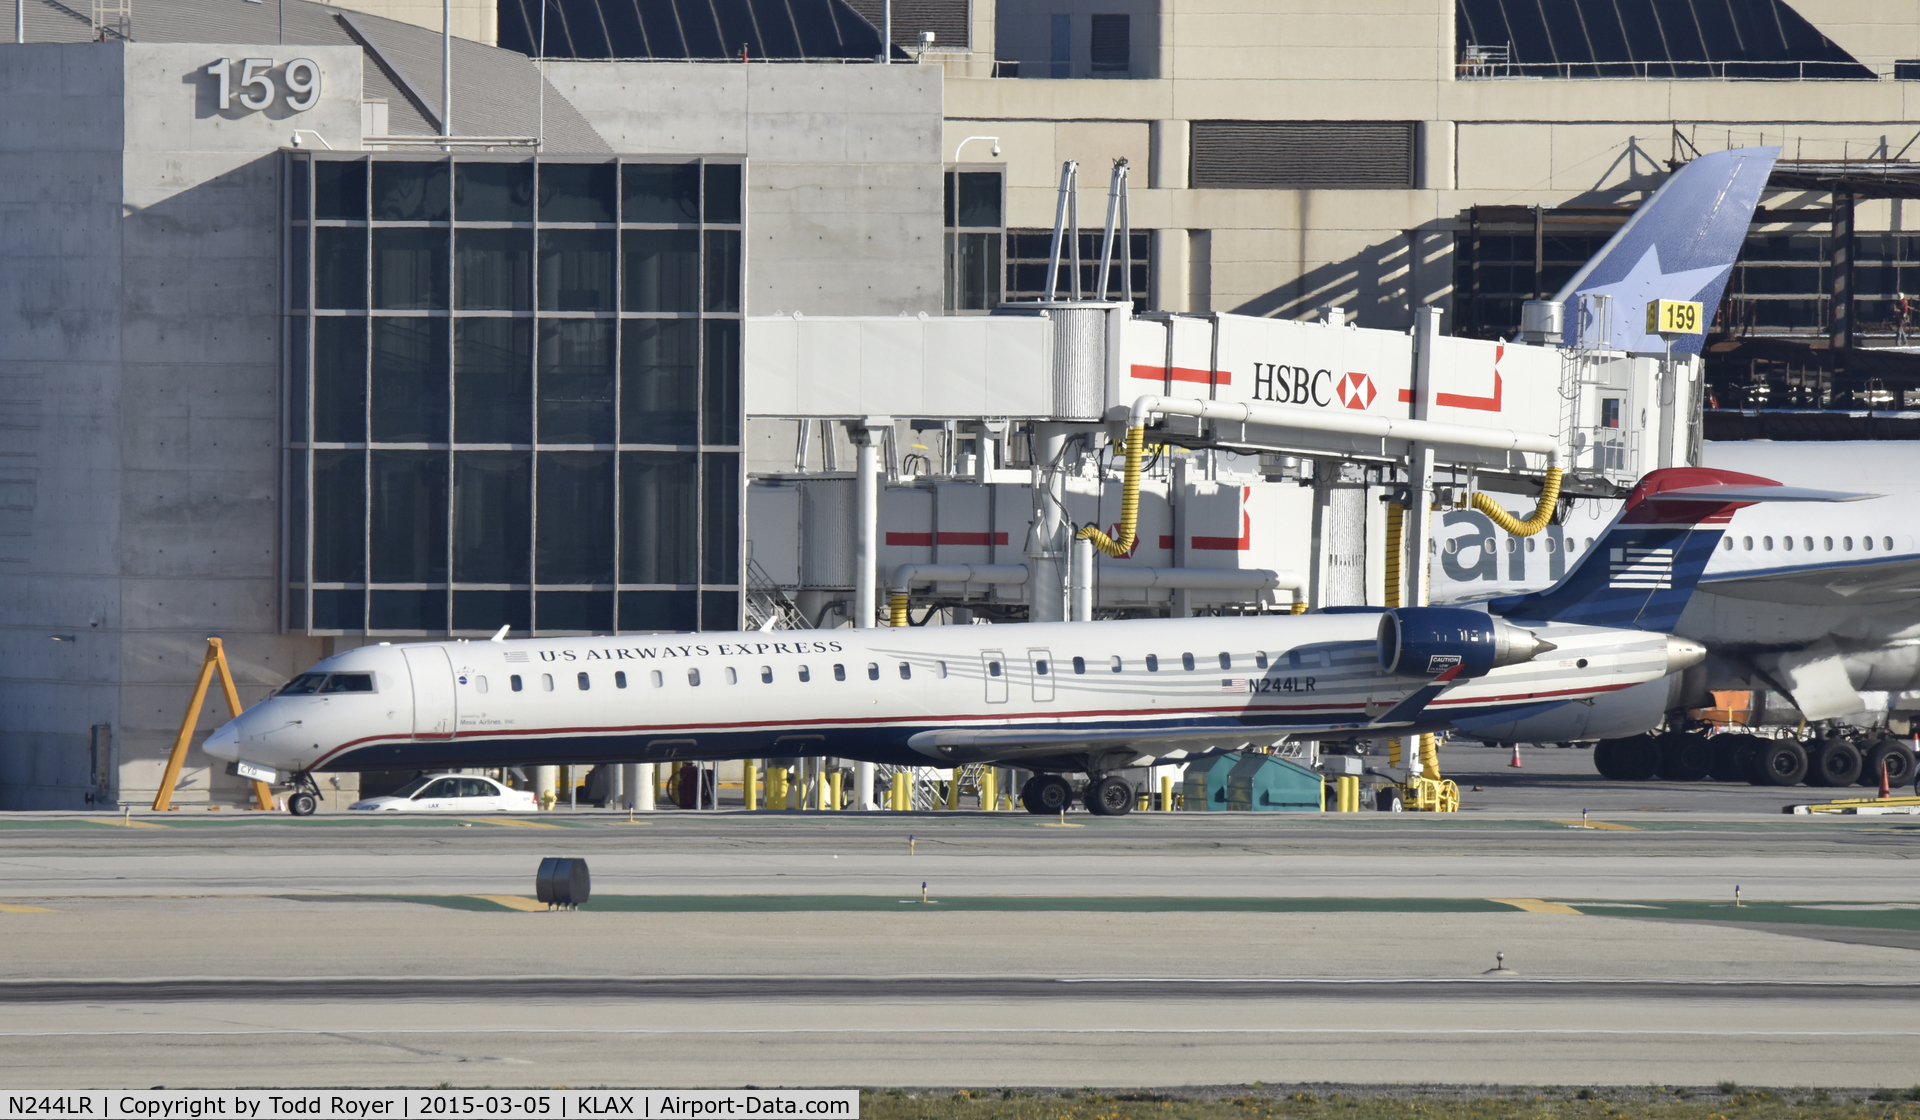 N244LR, 2009 Bombardier CRJ-900LR (CL-600-2D24) C/N 15233, Taxiing for departure at LAX